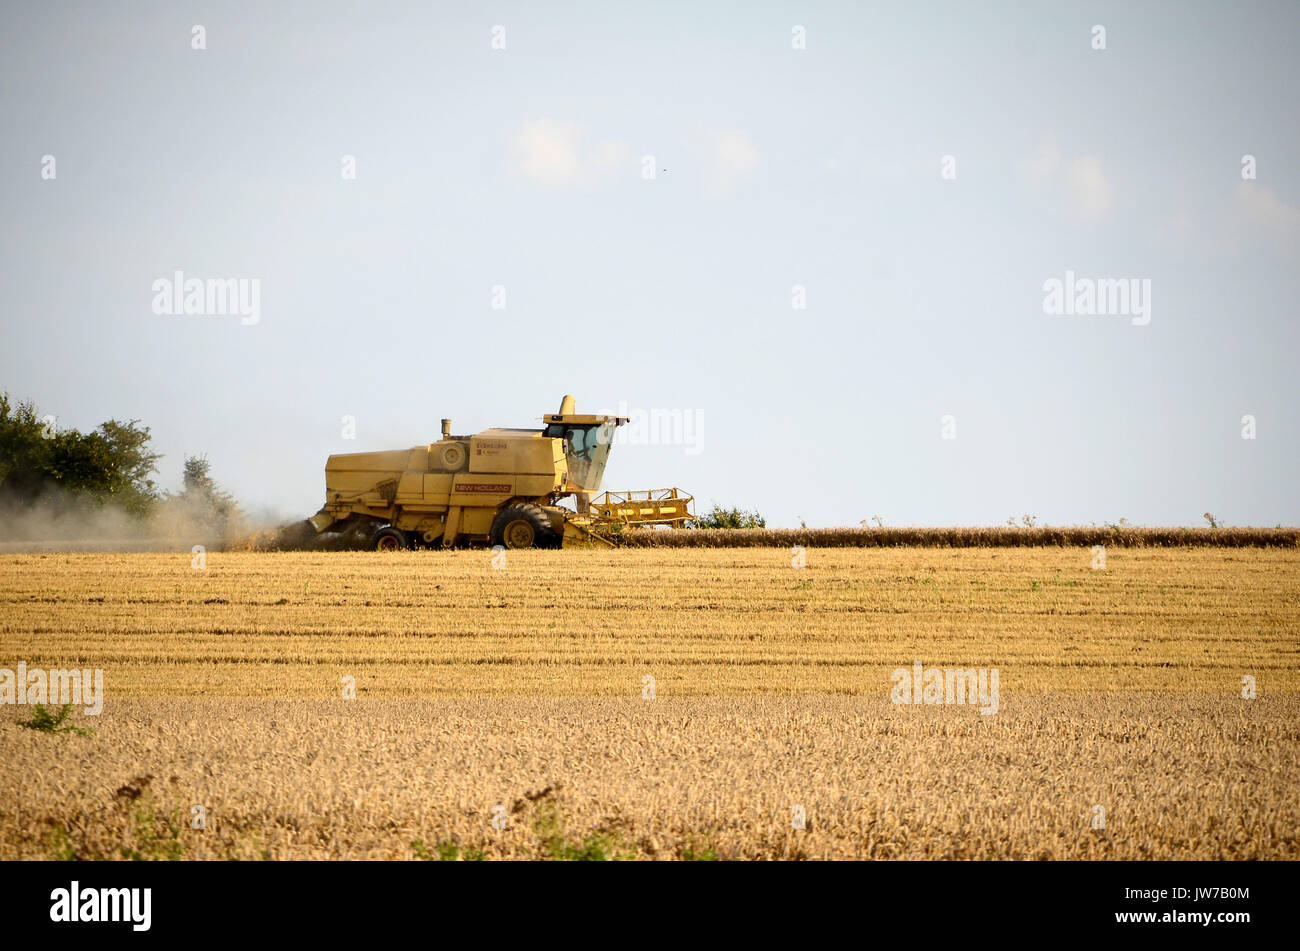 Klinting, Denmark - August 7, 2017: Harvest work with combine harvester in a wheat field. Stock Photo